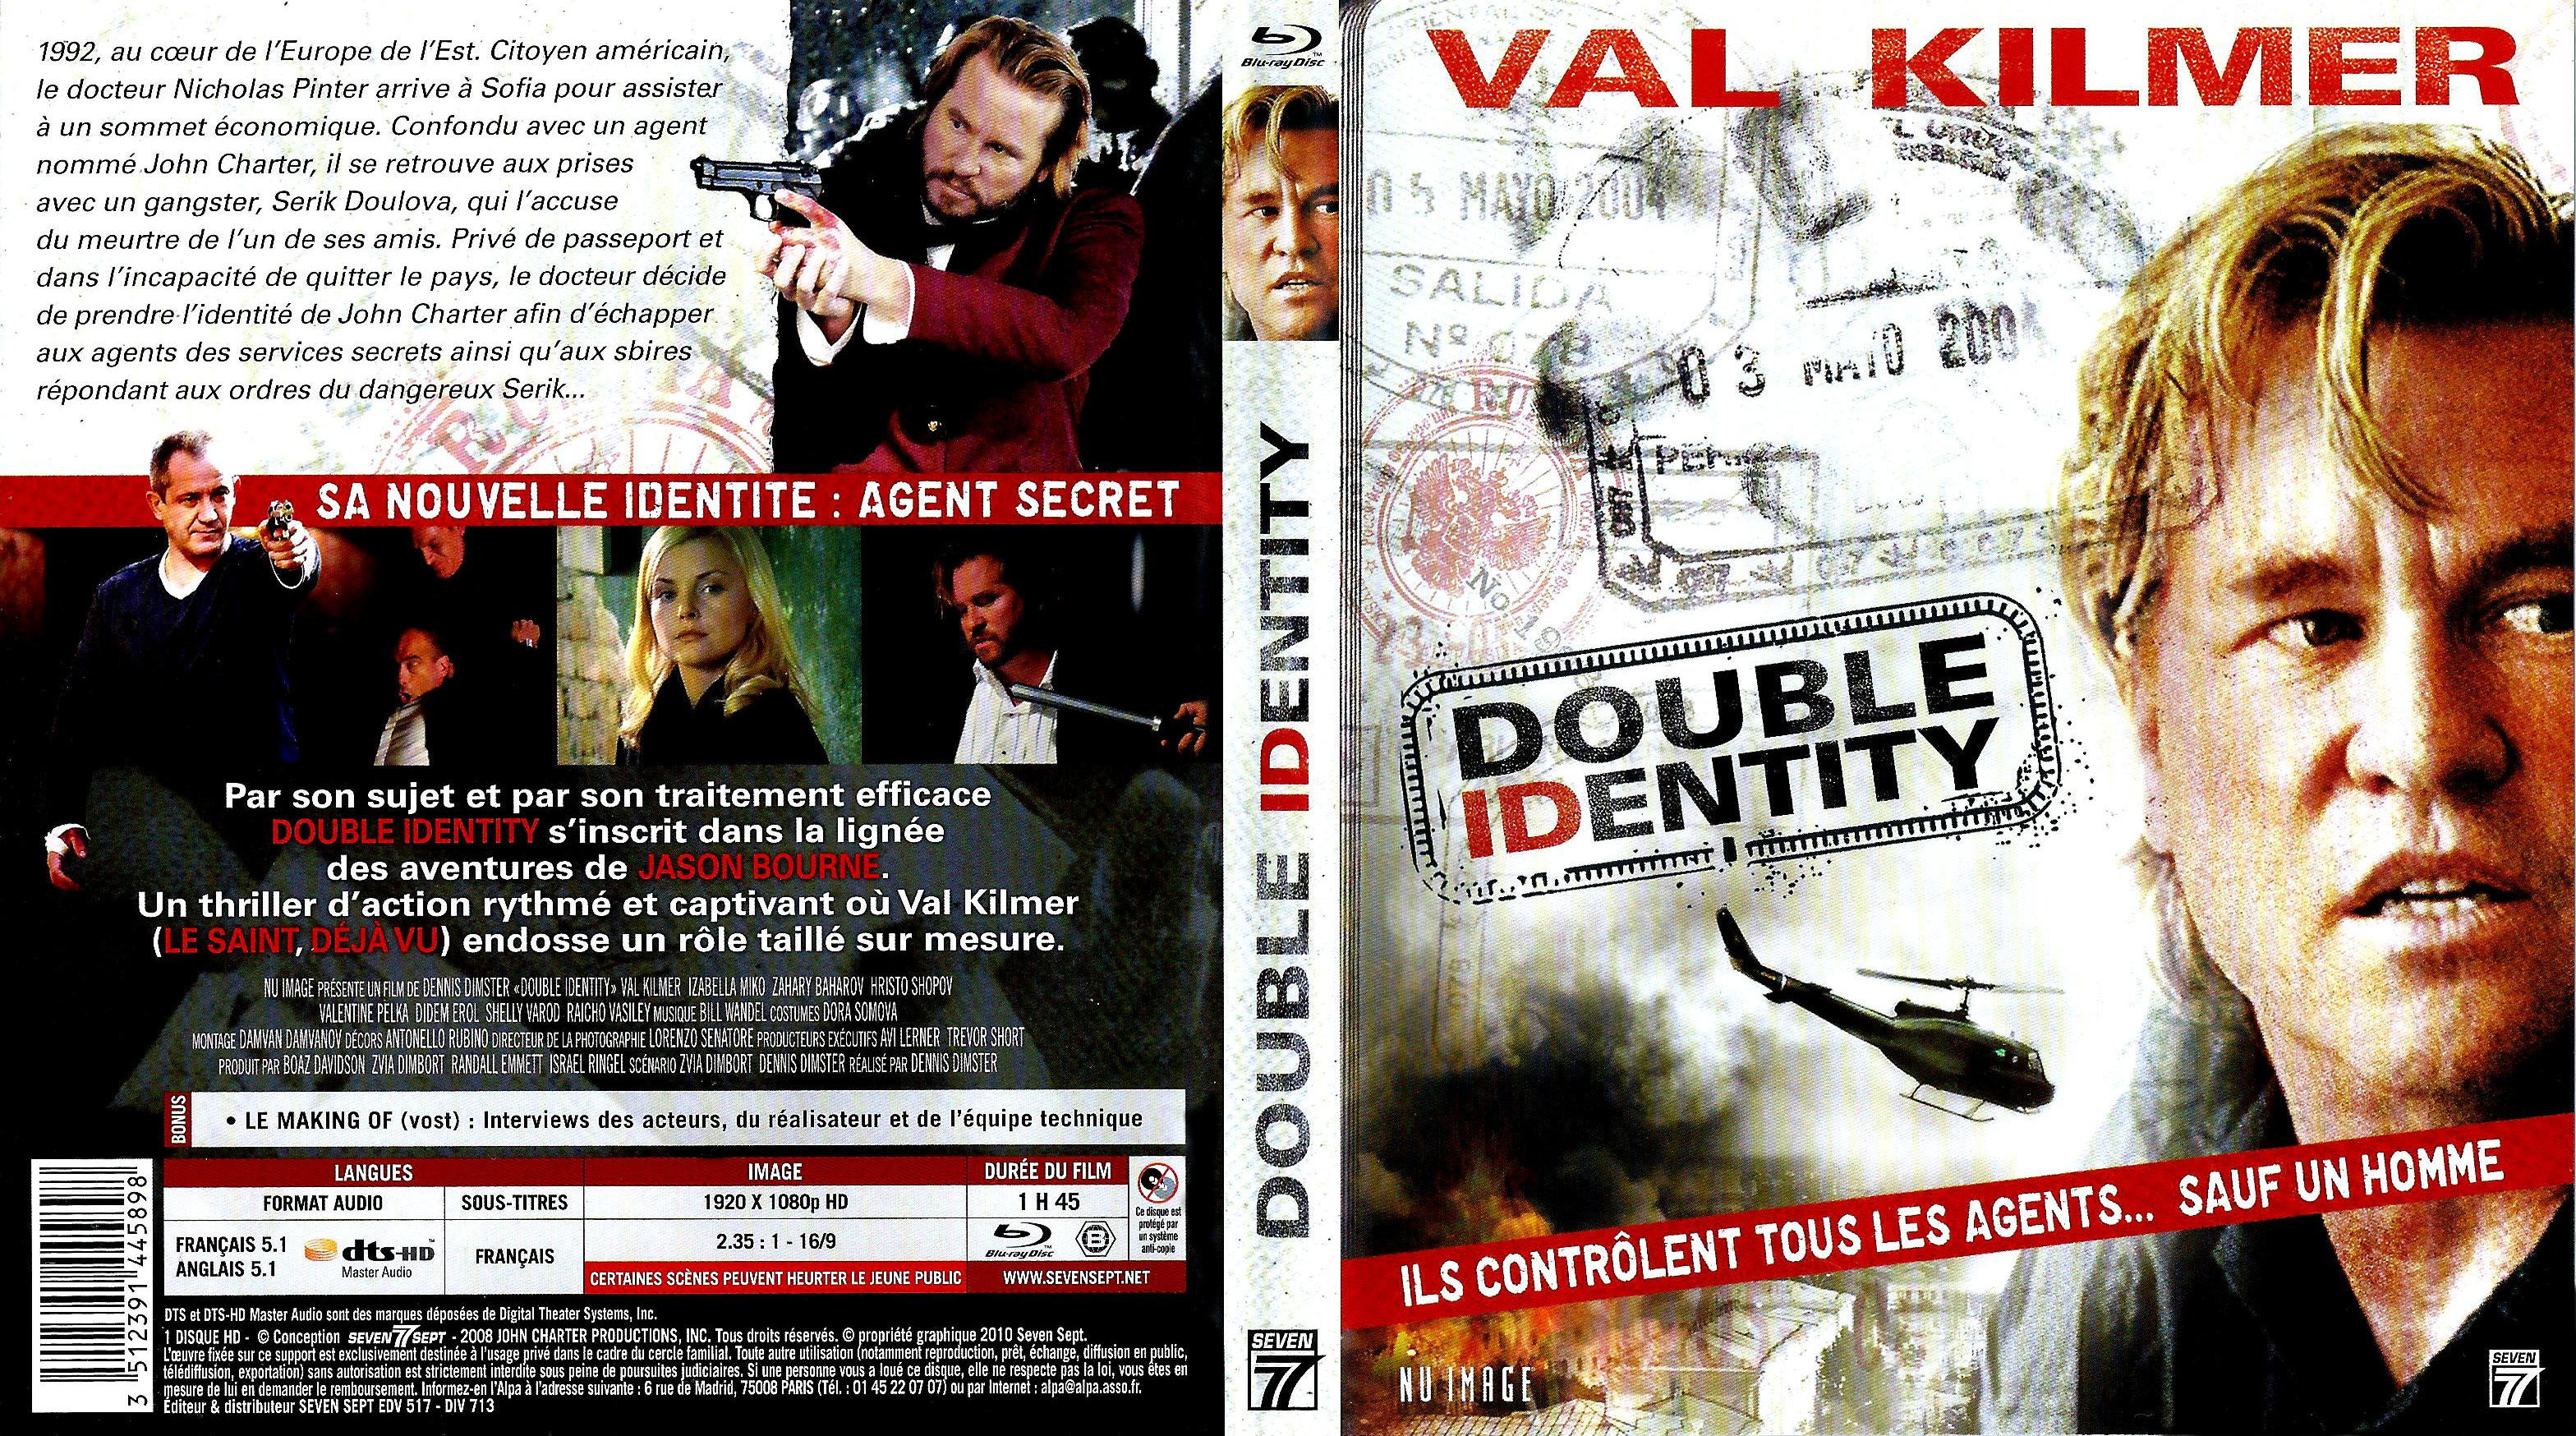 Jaquette DVD Double identity (BLU-RAY)